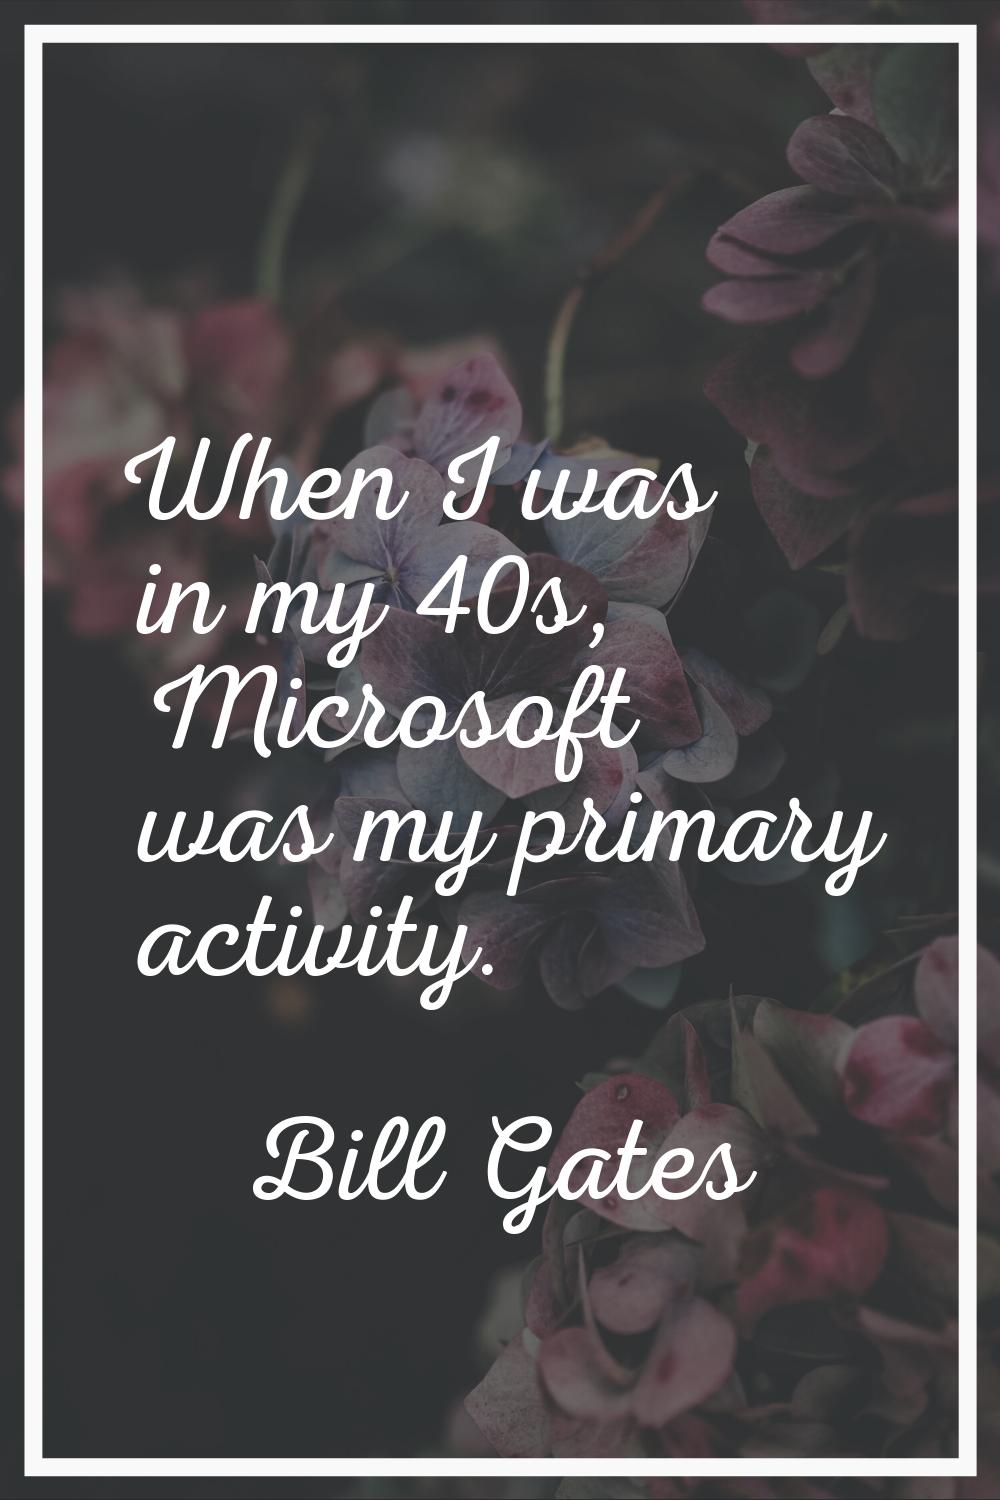 When I was in my 40s, Microsoft was my primary activity.